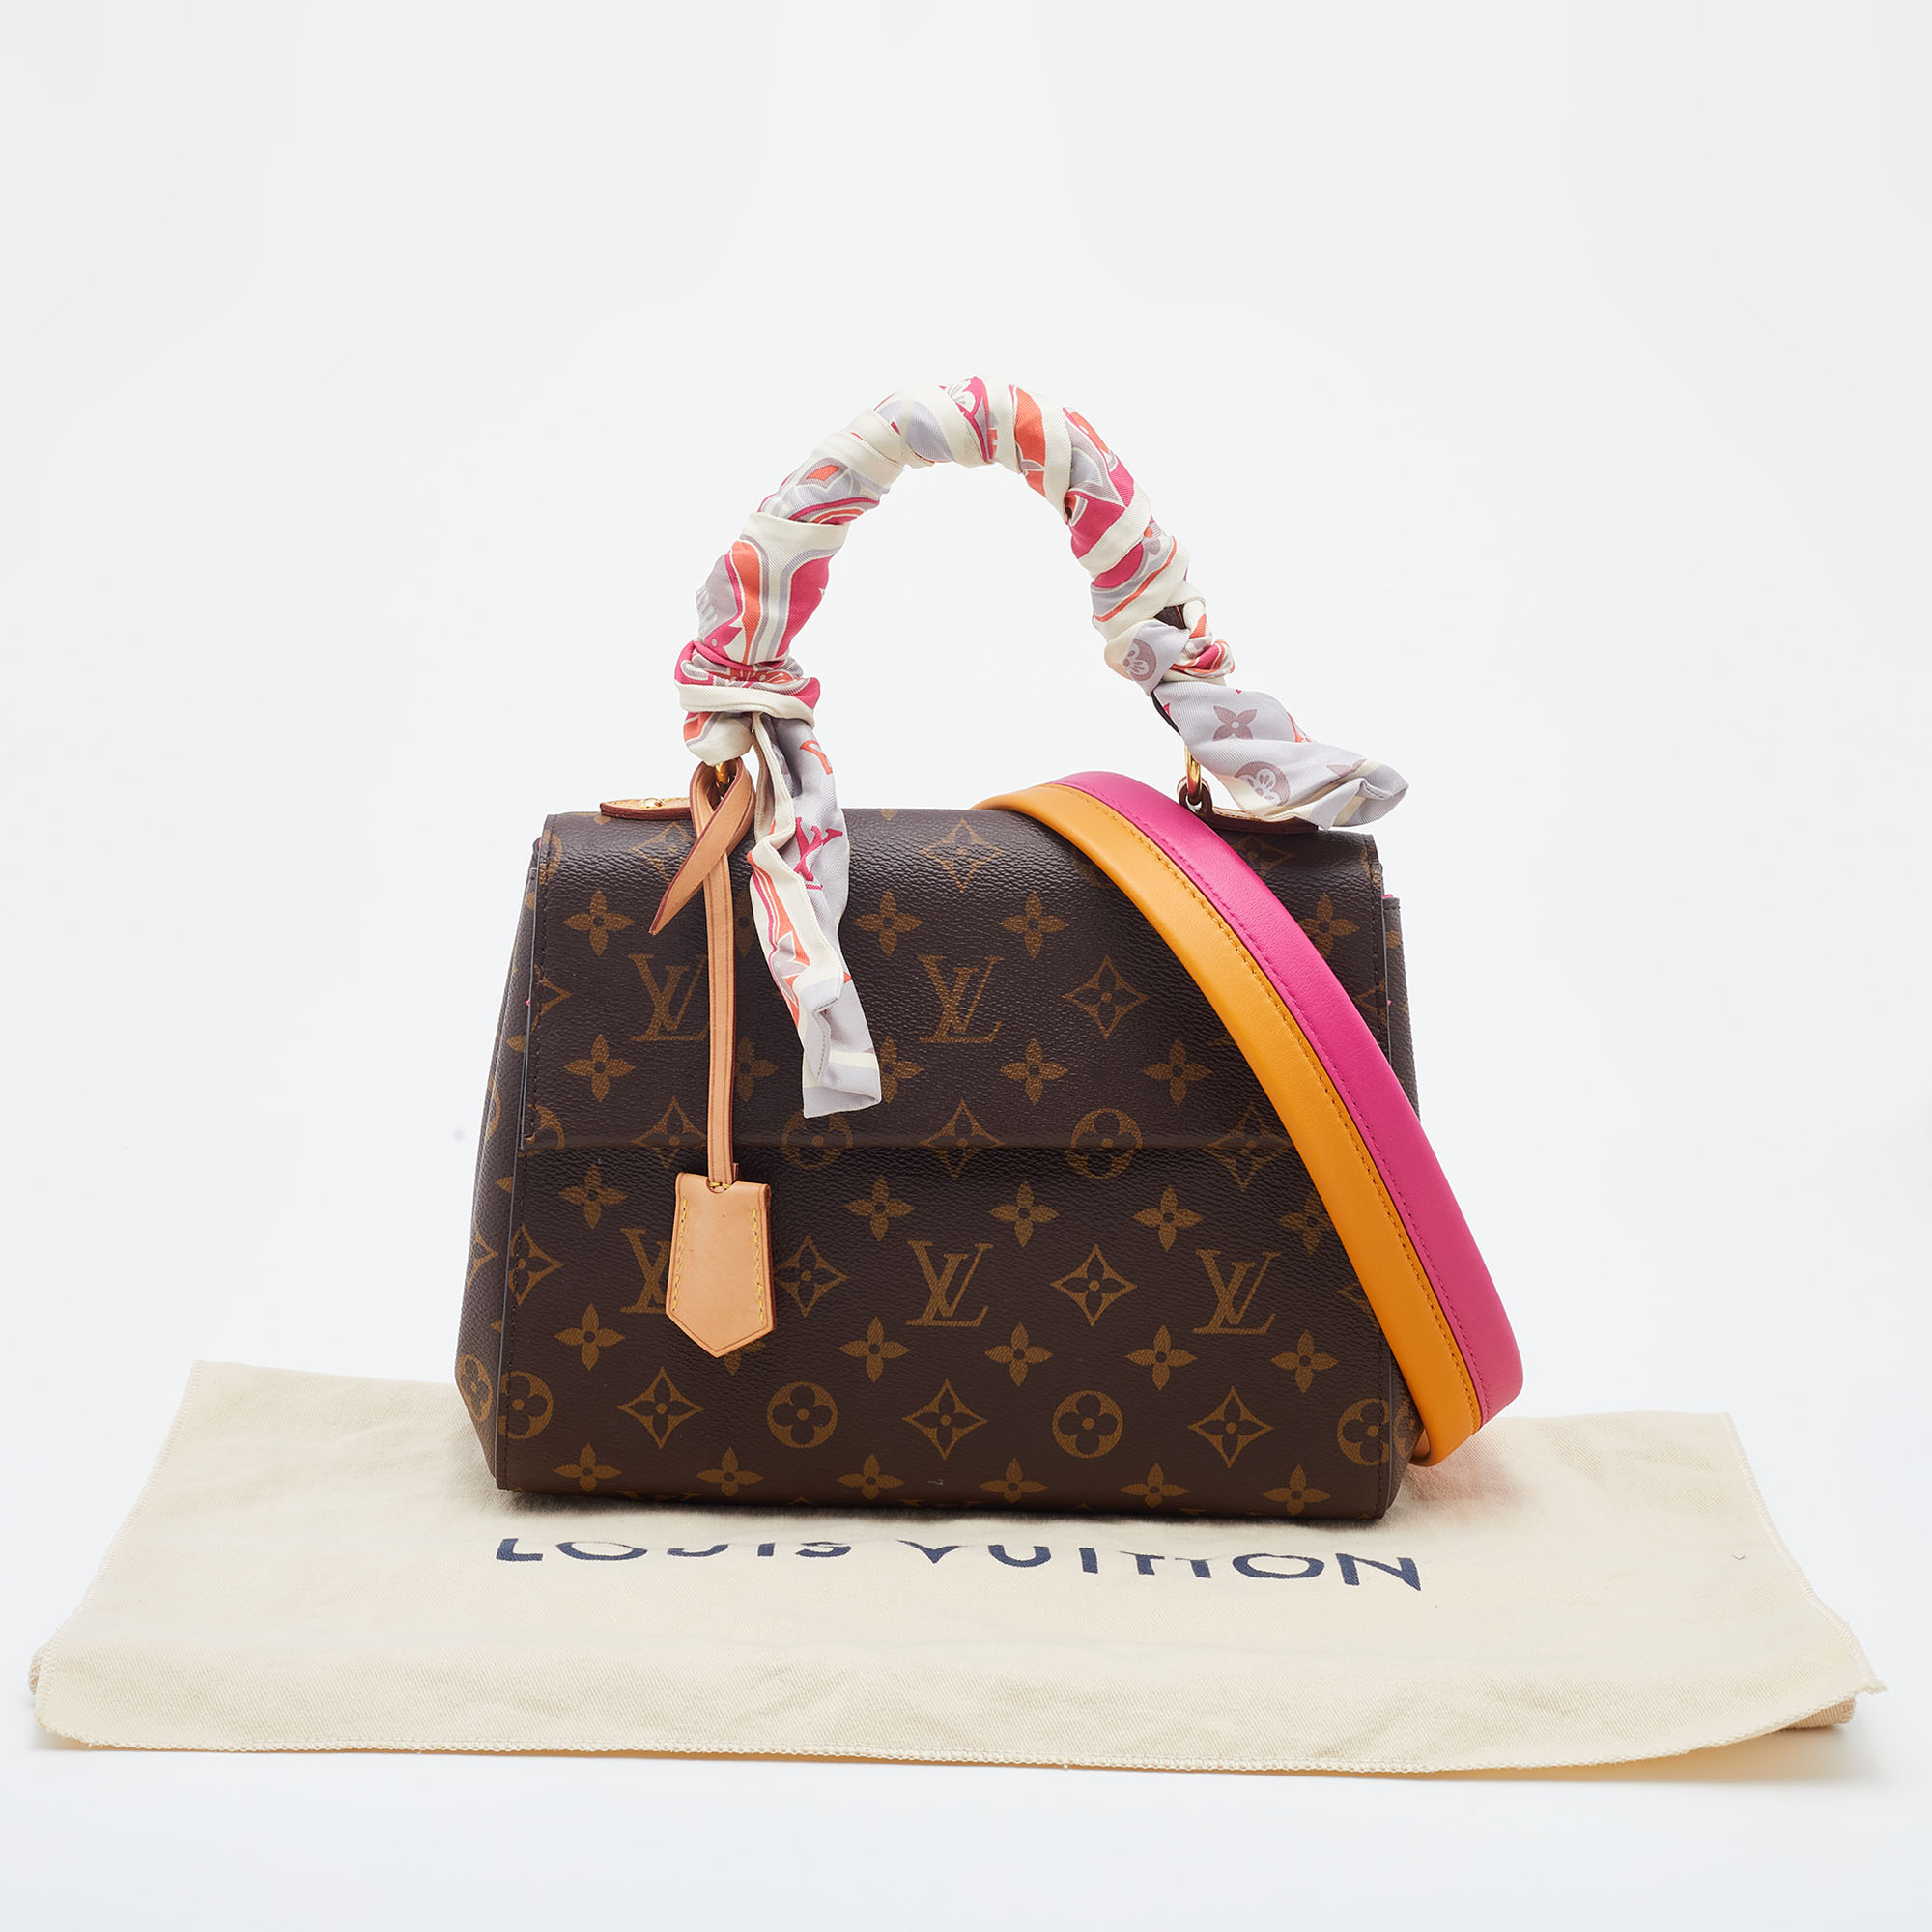 Products by Louis Vuitton: Cluny BB  Louis vuitton bag outfit, Louis  vuitton handbags, Louis vuitton bag neverfull